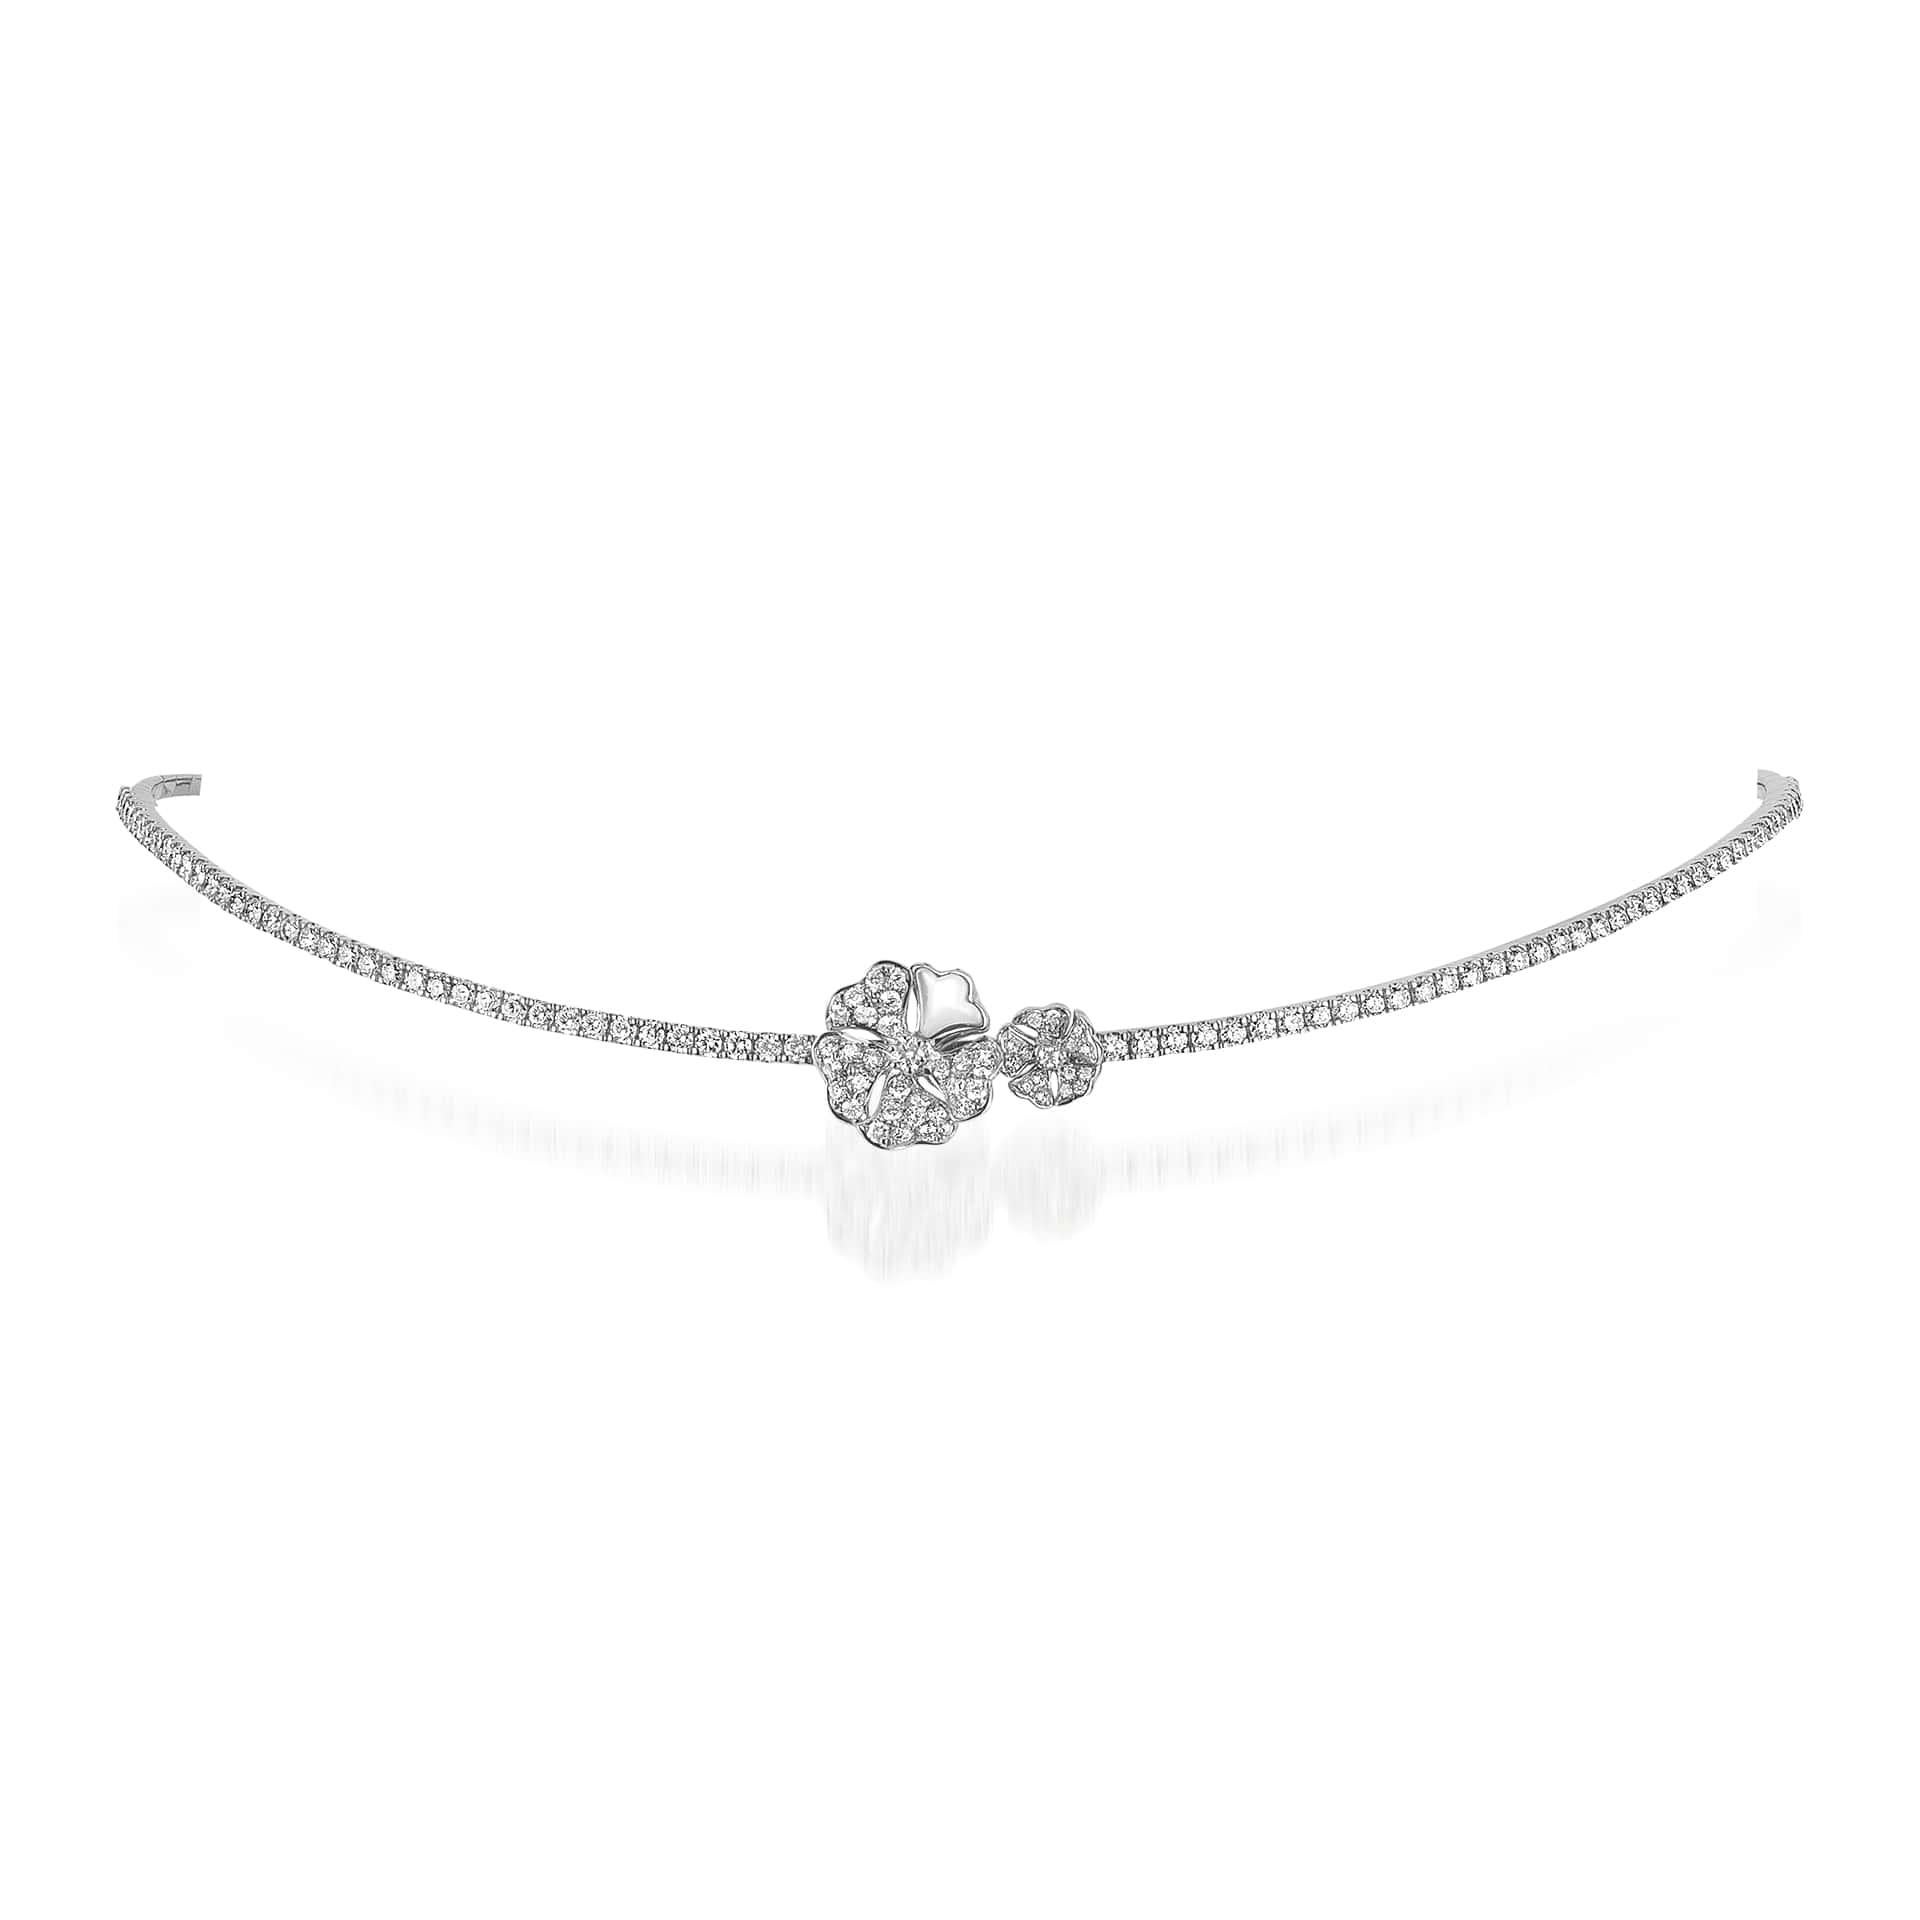 Bloom Pavé Diamond Flower Duo Choker with Mother-of-Pearl in 18K White Gold

Inspired by the exquisite petals of the alpine cinquefoil flower, the Bloom collection combines the richness of diamonds and precious metals with the light versatility of